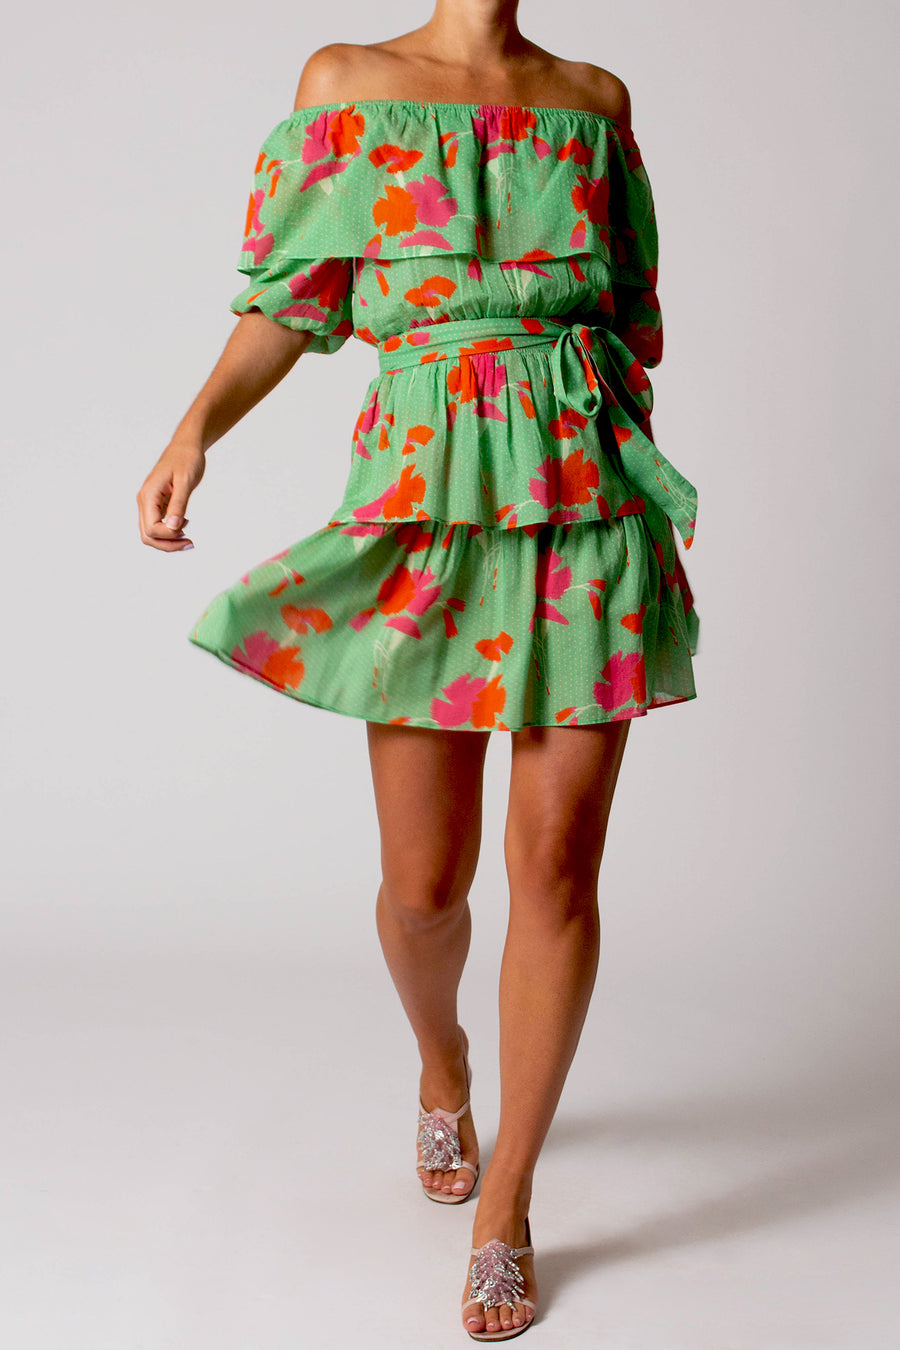 This is the photo of a woman wearing a short green dress with pink and orange flowers on it.